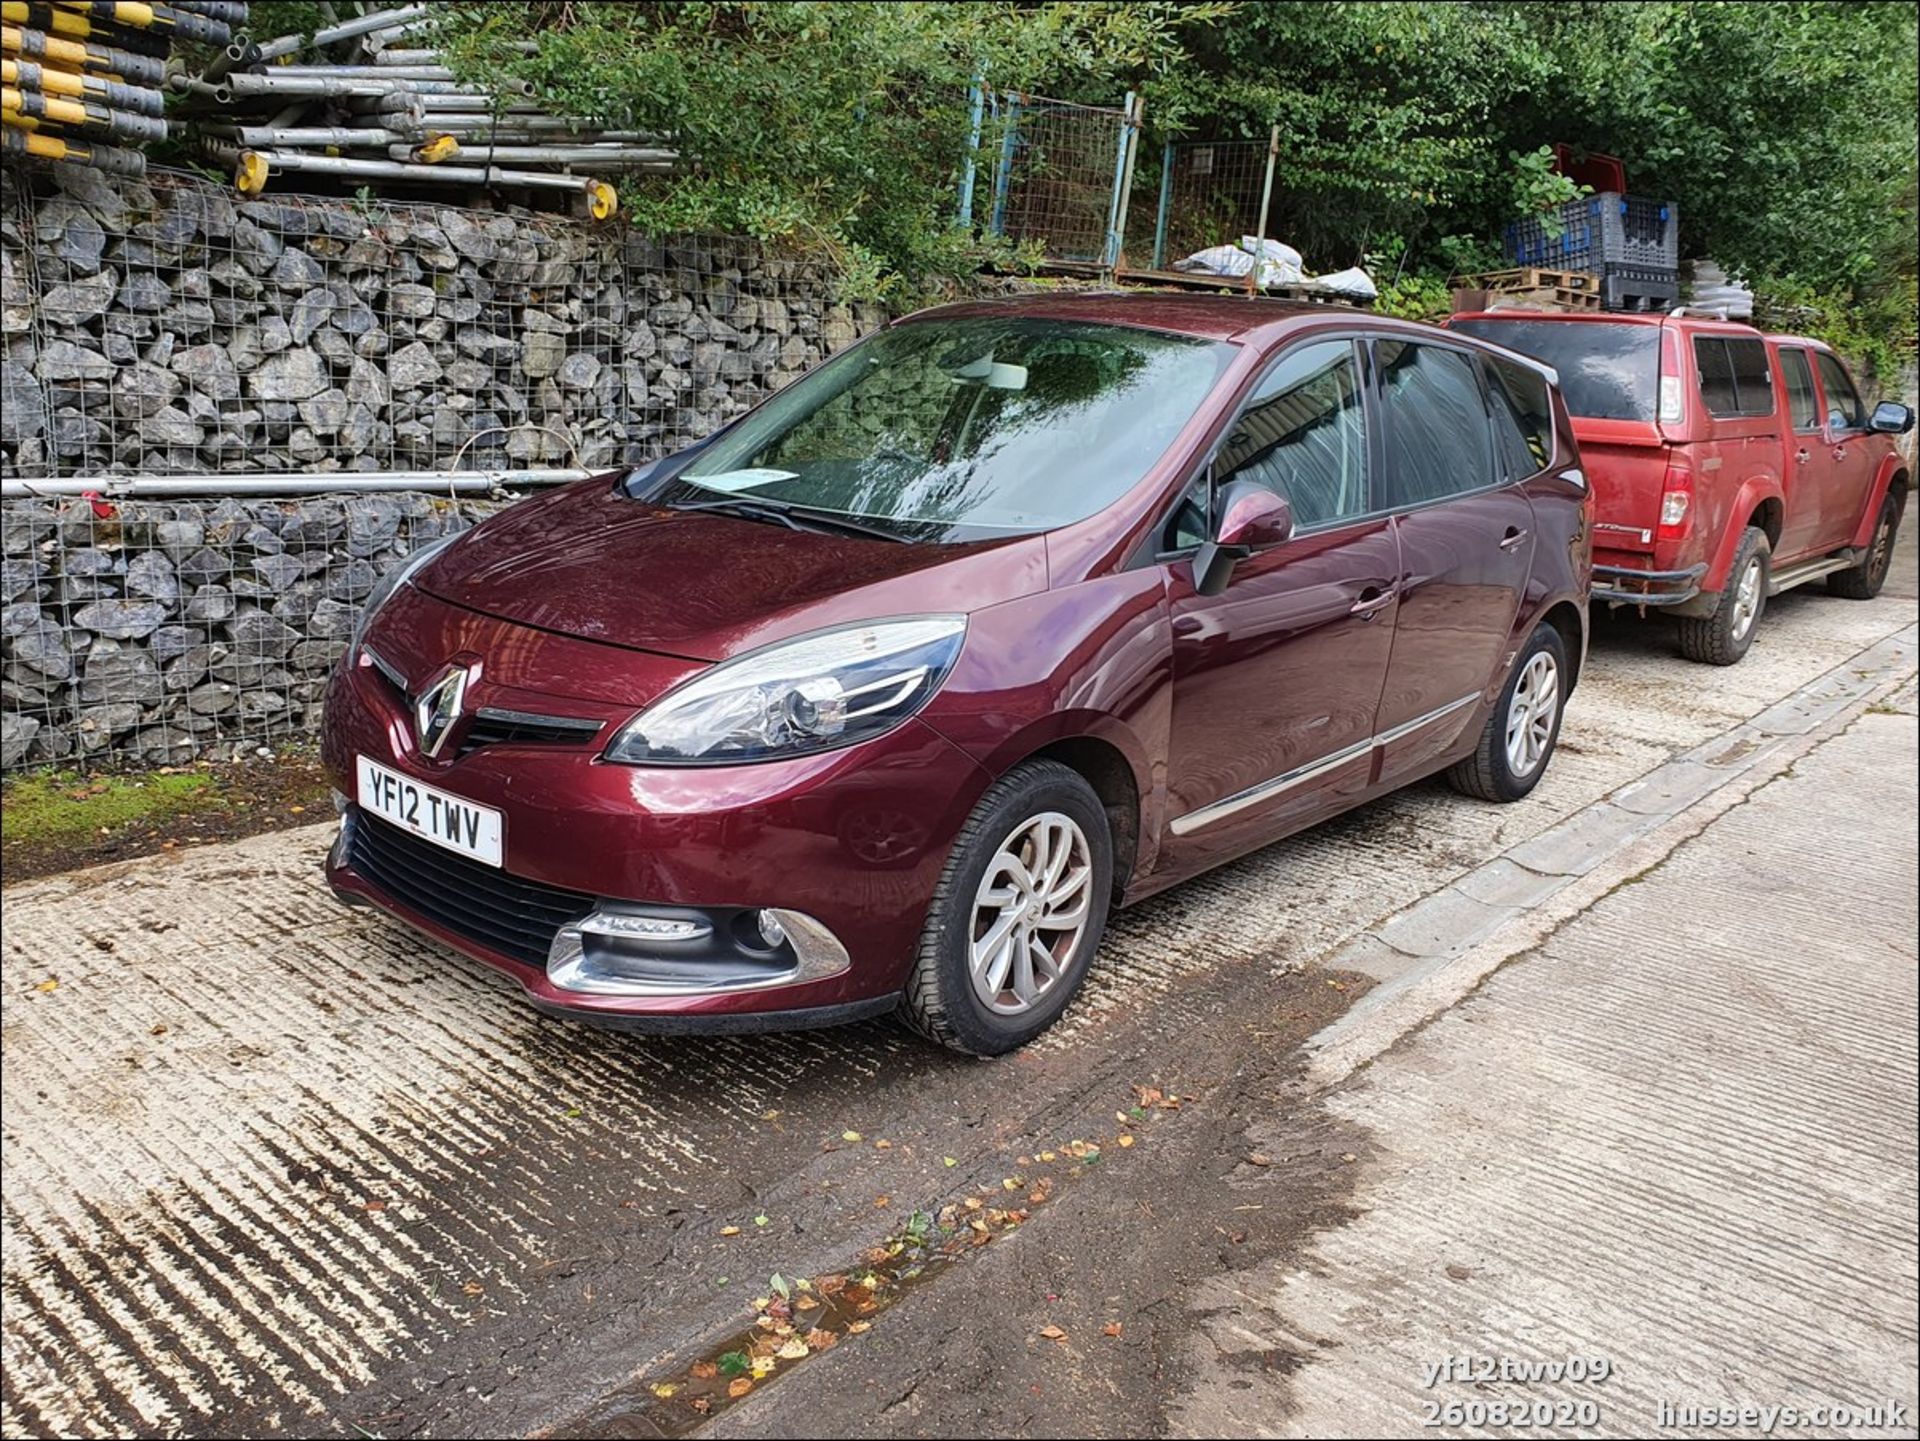 12/12 RENAULT G SCENIC D-QUE TT ENERGY - 1598cc 5dr MPV (Red, 129k) - Image 9 of 10